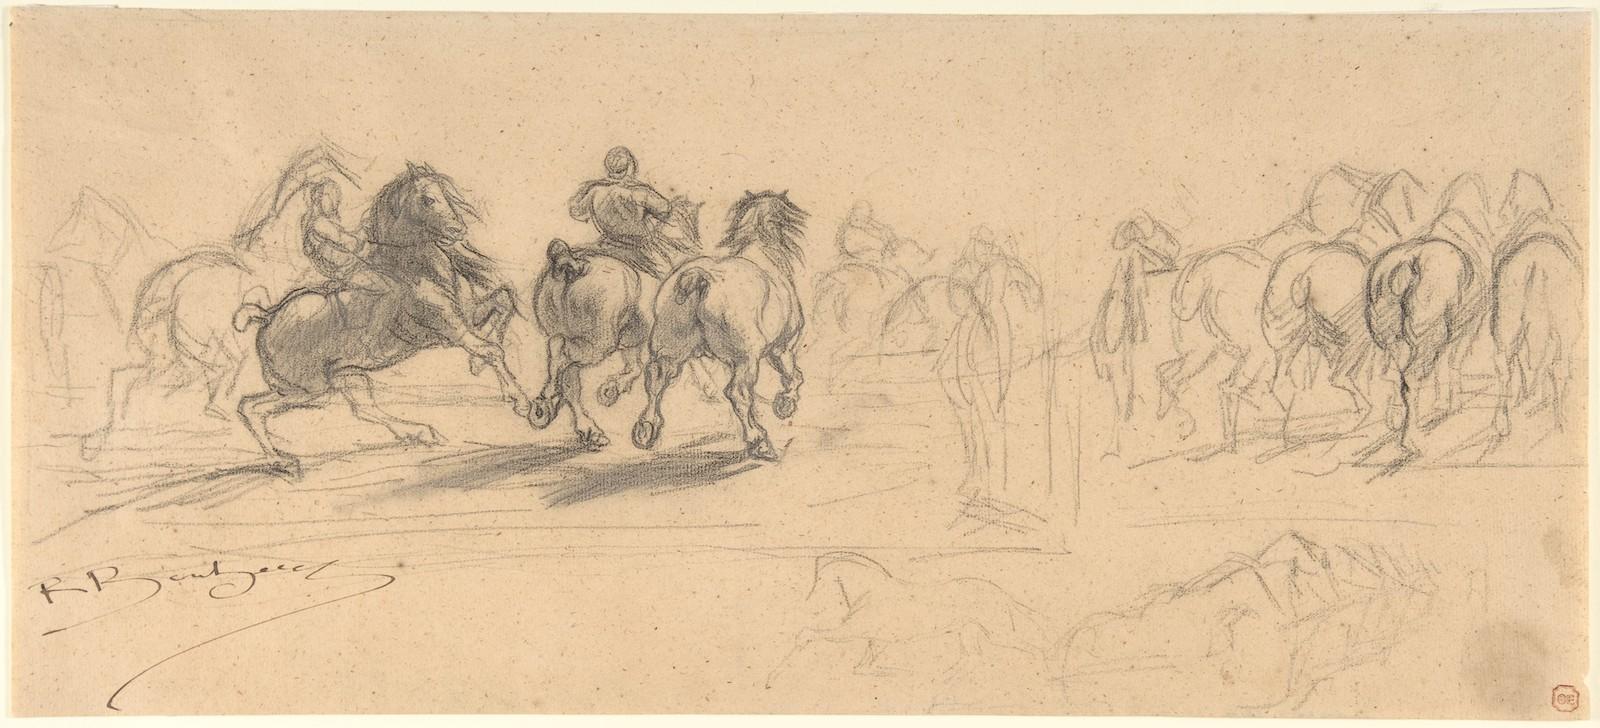 Rosa Bonheur, Study for The Horse Fair, 1840-99. Black chalk and graphite. 7 1:4 x 16 3:16 in. (18.4 x 41.1cm). The Met. Gift of Alexander Johnson and Roberta Olson, in honor of Jacob Bean, 1991. 1991.463.